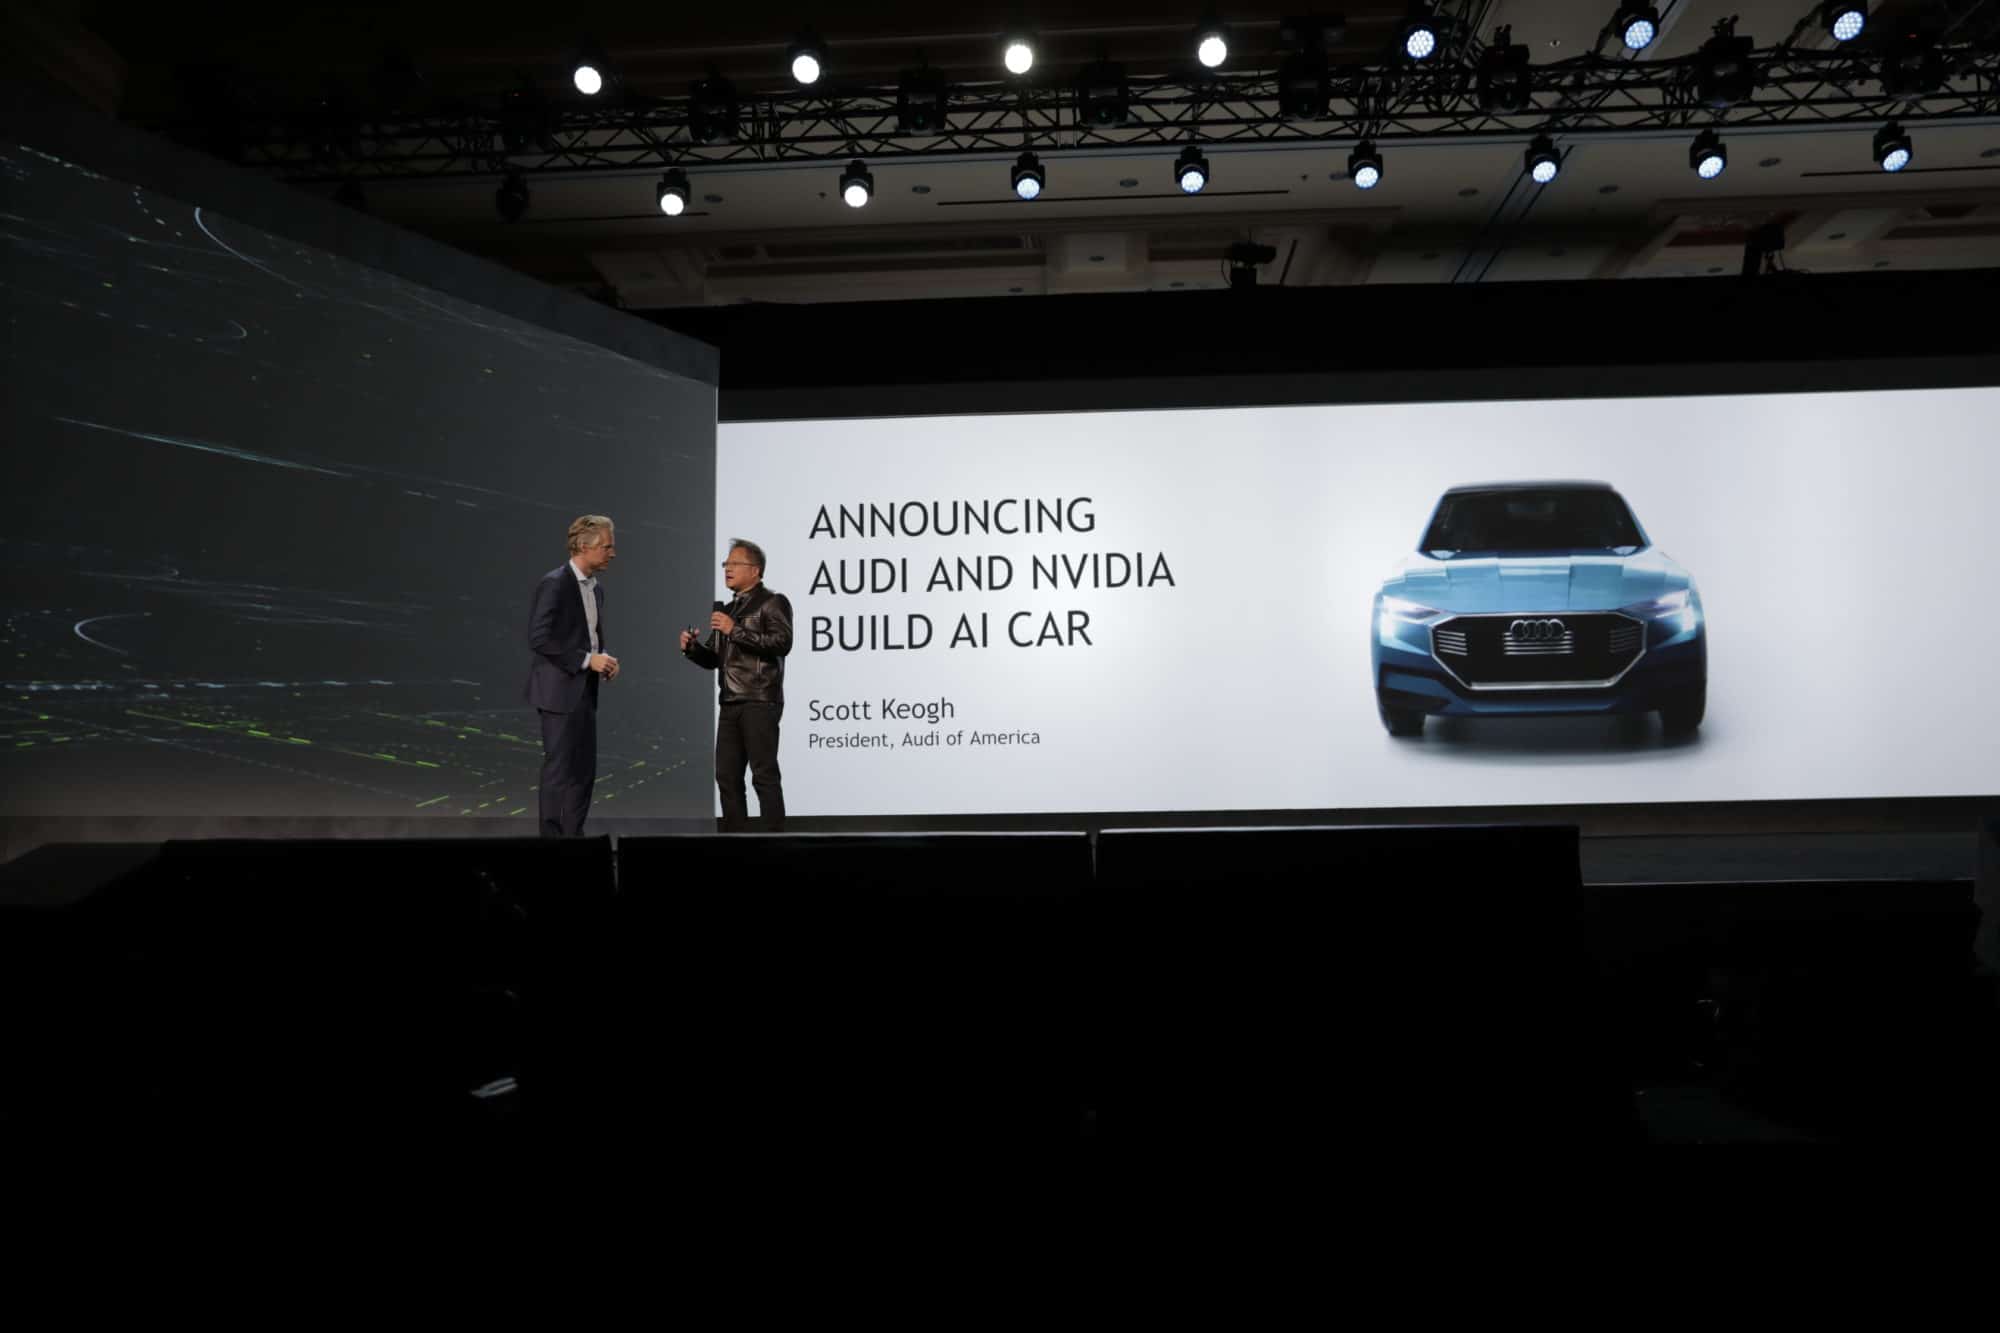 Scott Keogh, president of Audi of America, speaks with NVIDIA CEO at CES 2017